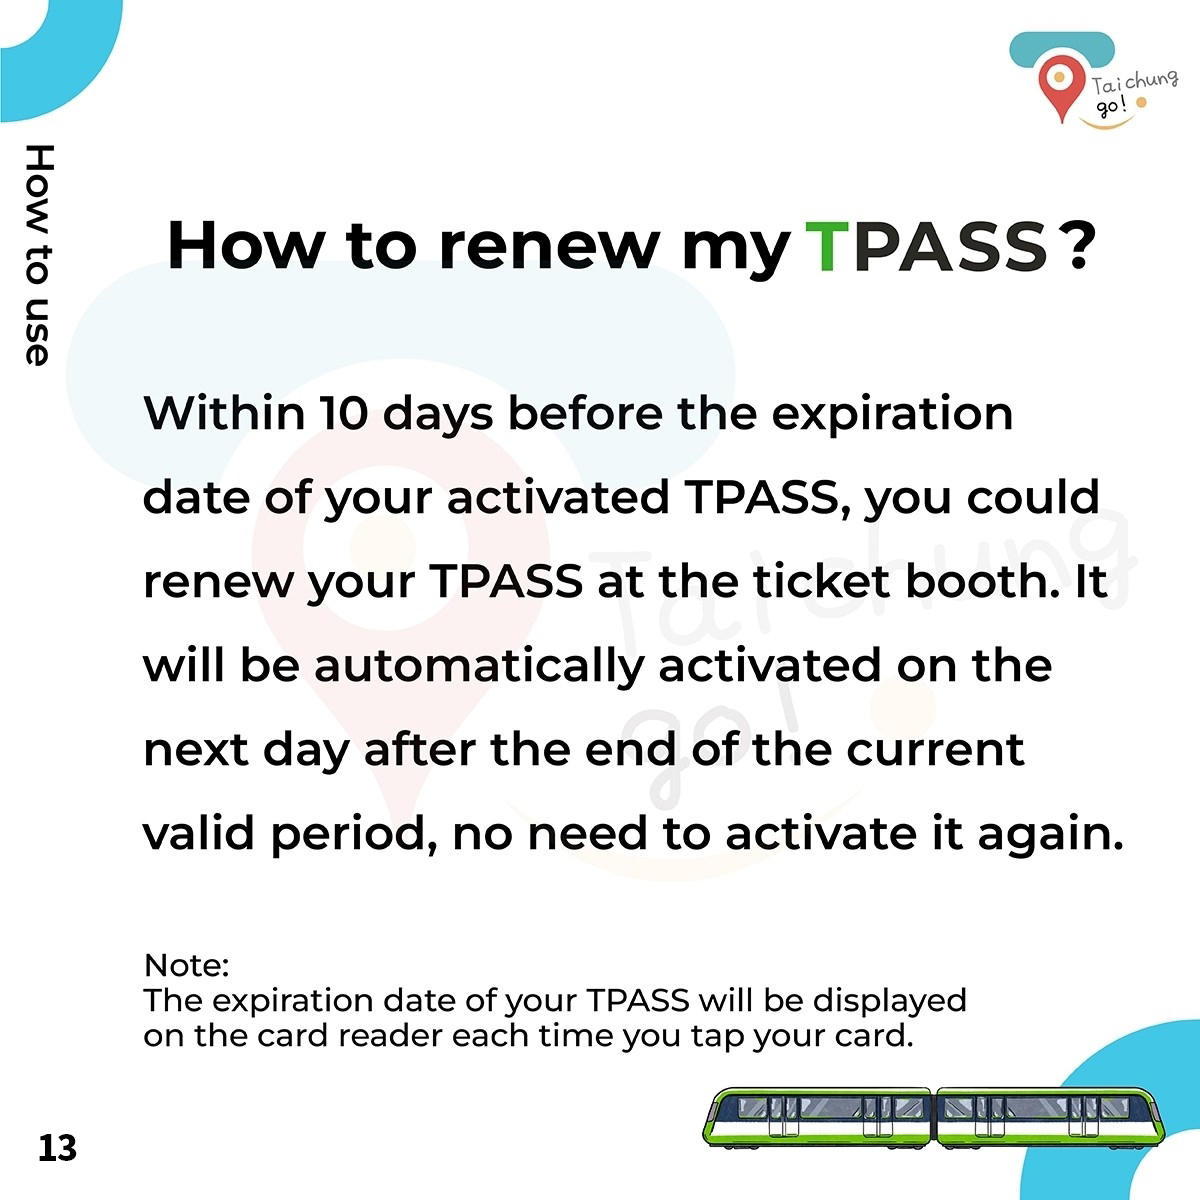 How to renew my TPASS?? Within 10 days before the expiration date of your activated TPASS,you could renew your TPASS at the ticket booth. It will be automatically activated on the next day after the end of the current valid period,no need to activate it again.